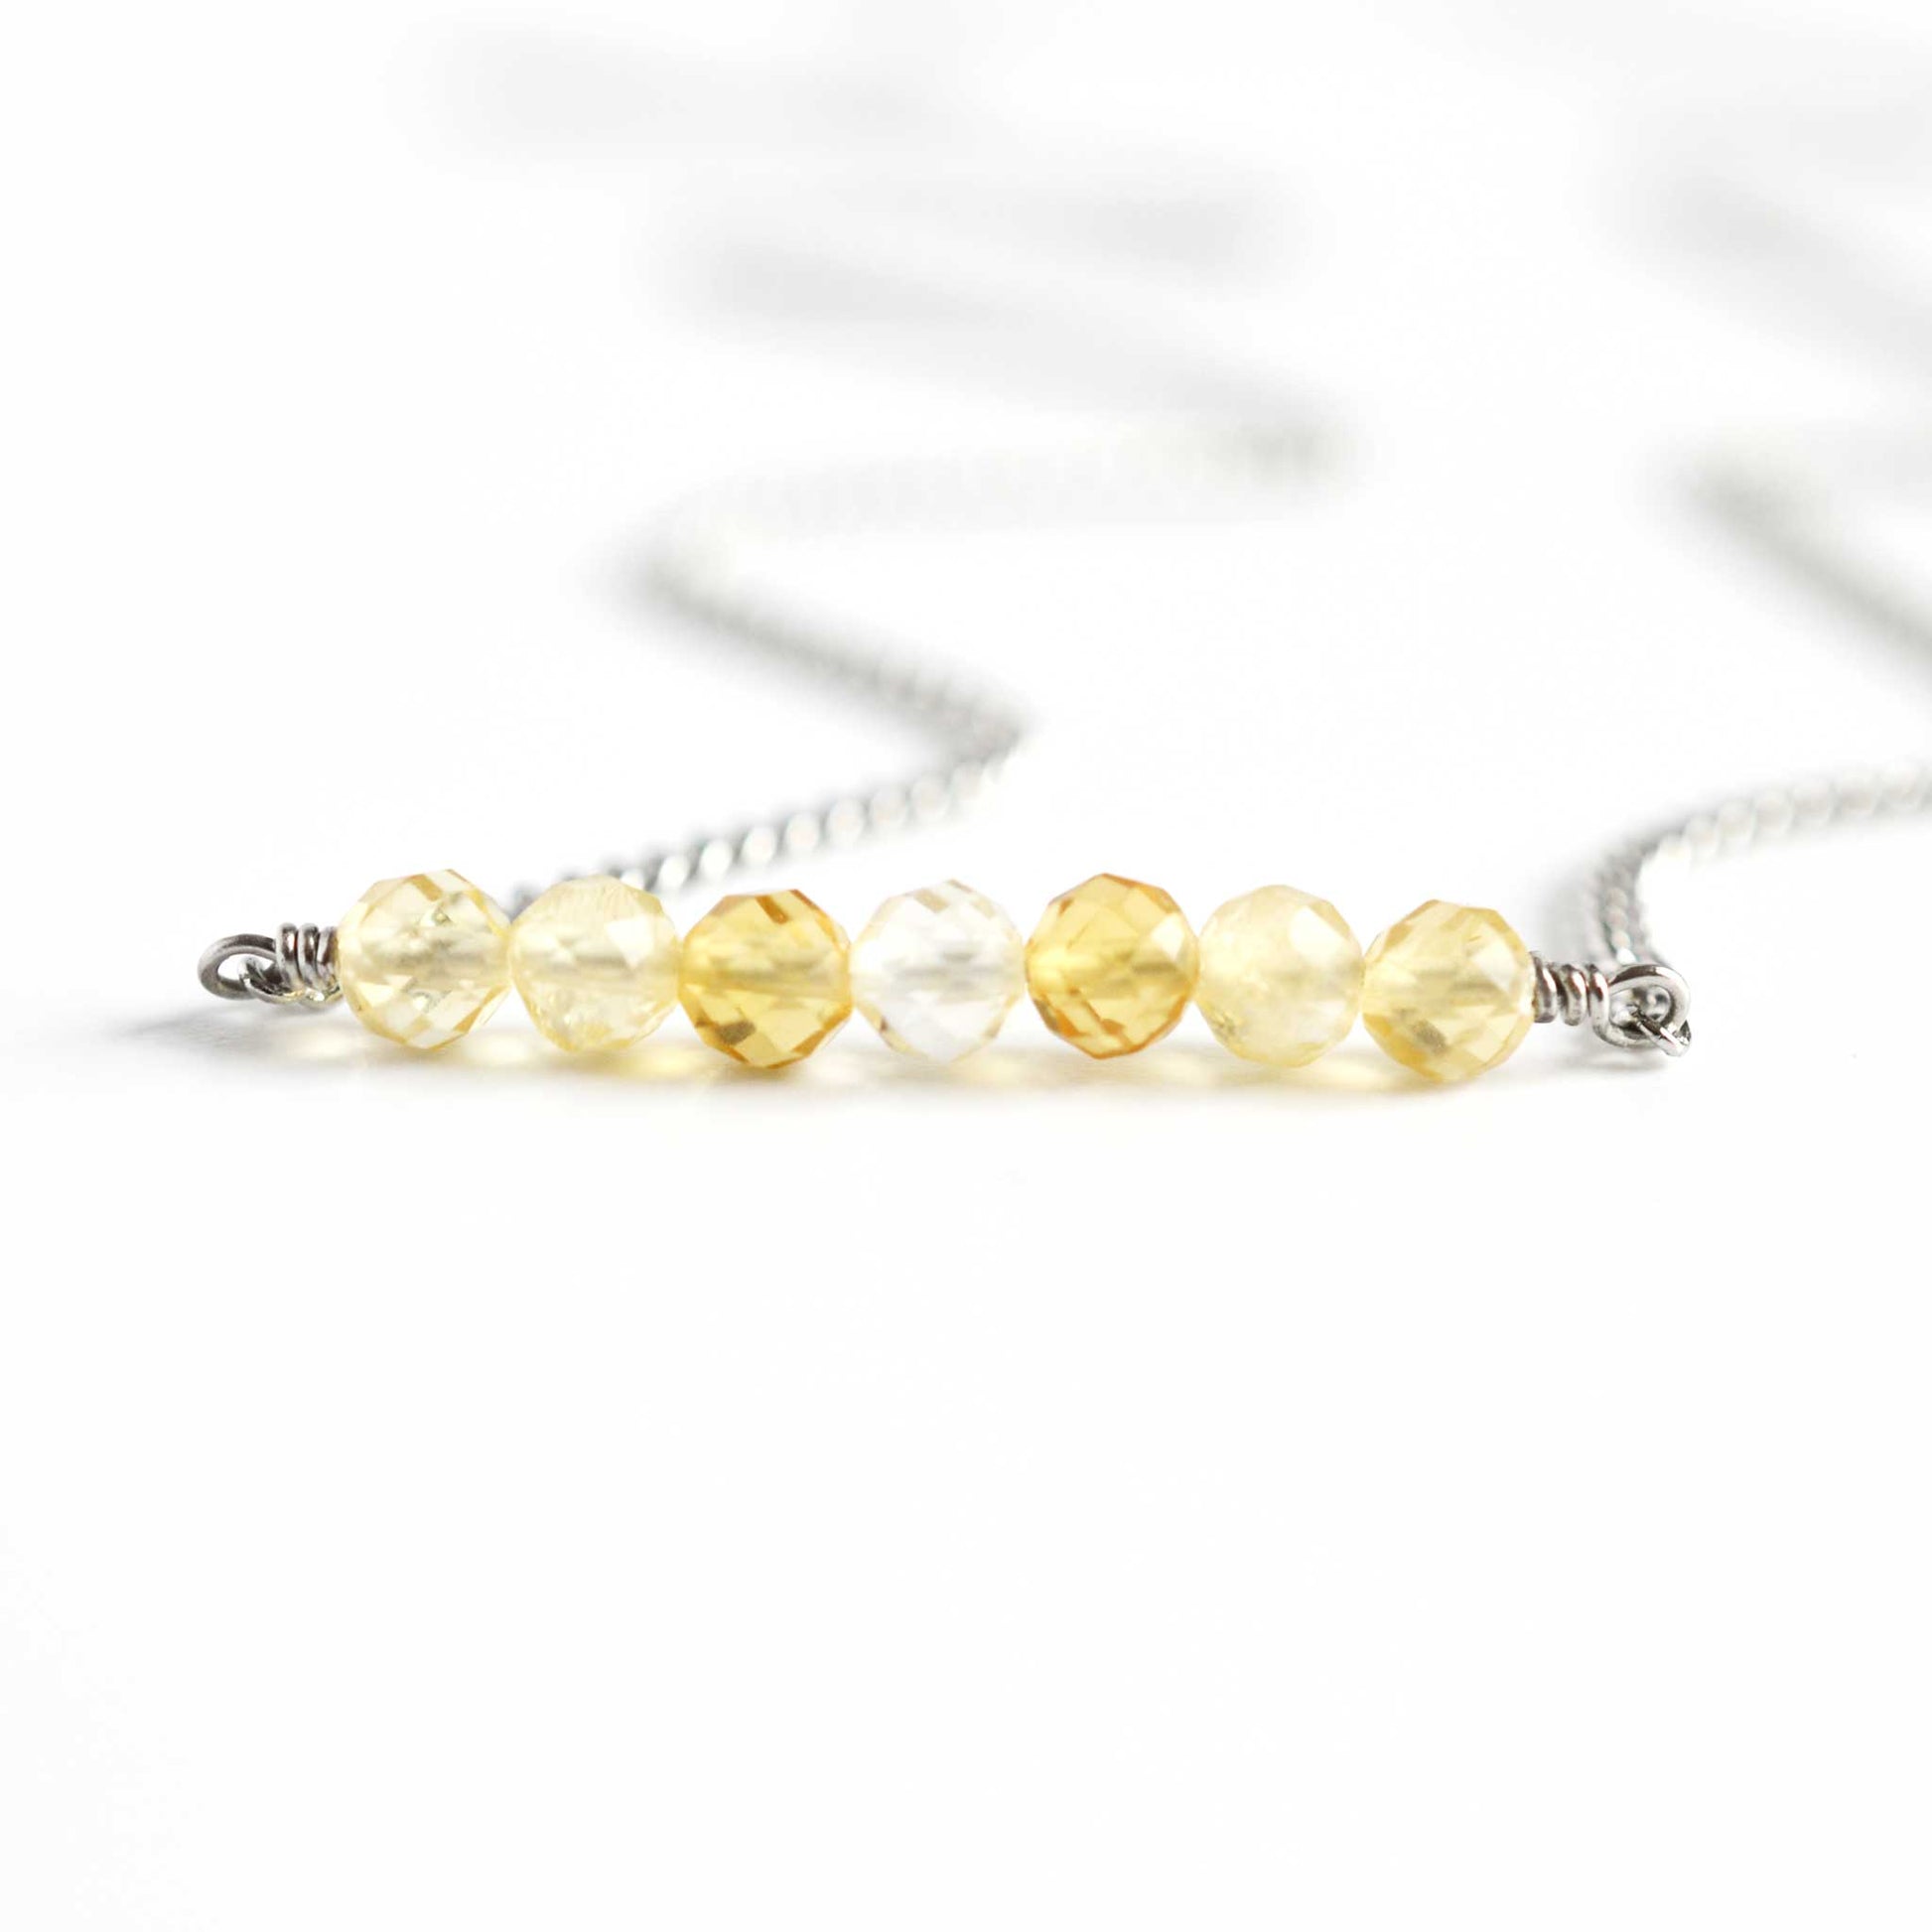 Close up of Citrine crystal necklace with seven small round faceted pale yellow Citrine beads